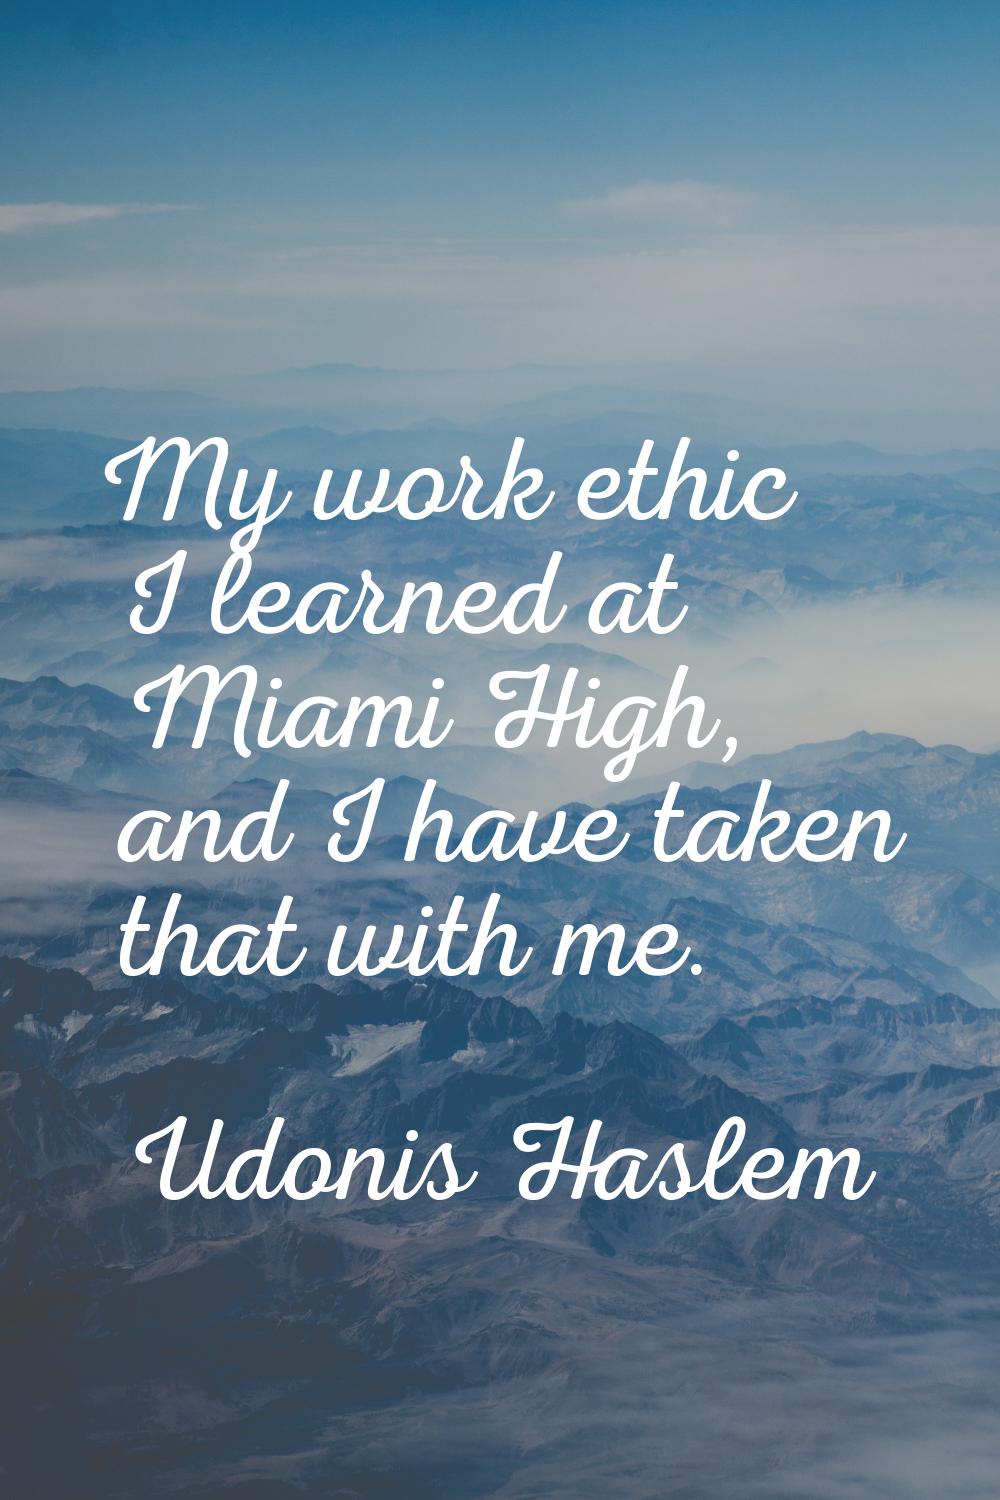 My work ethic I learned at Miami High, and I have taken that with me.